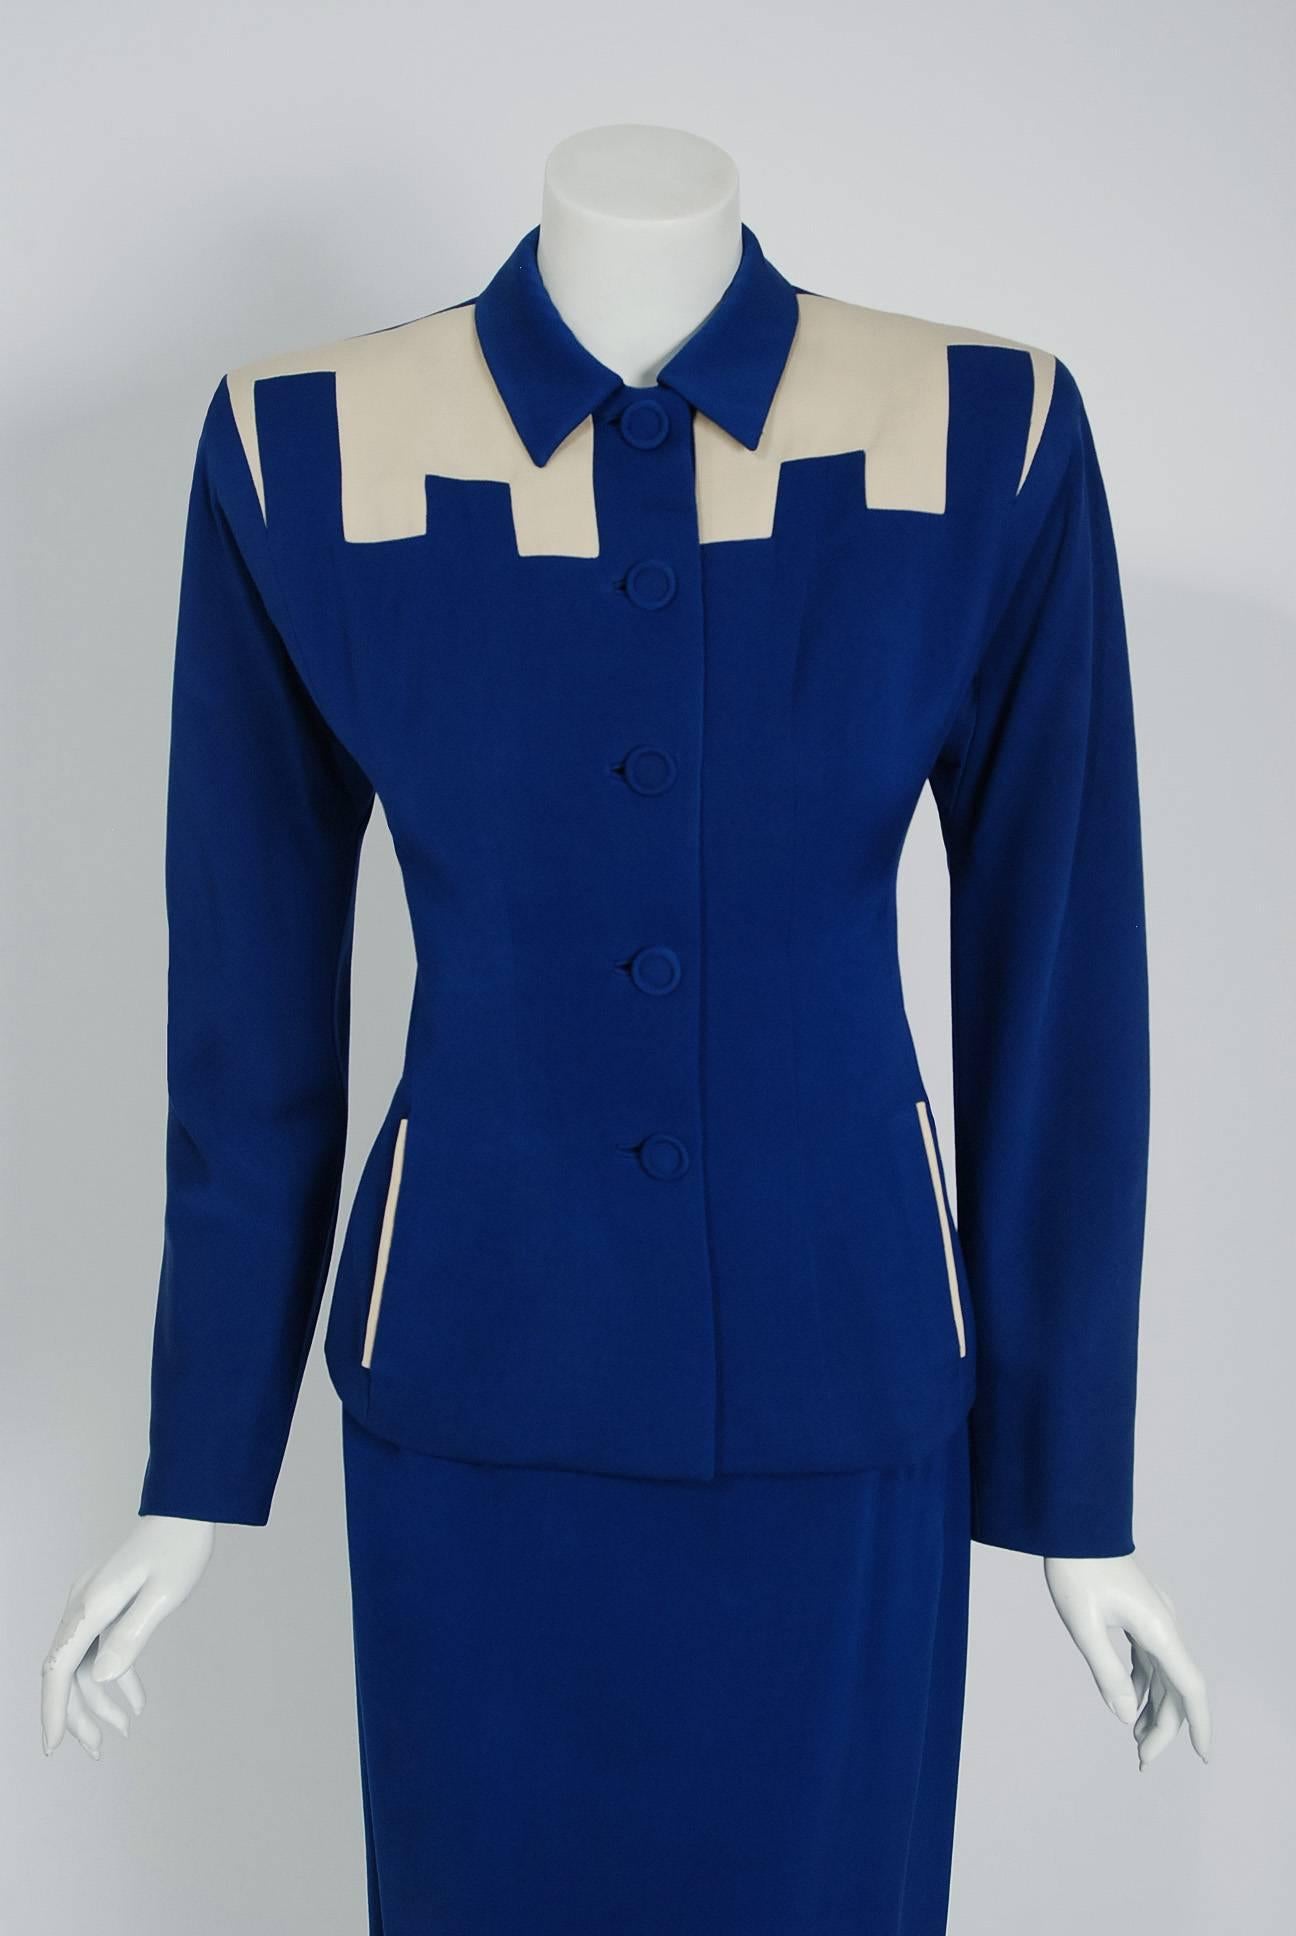 This stunning Fred A. Block Original two-piece ensemble, dating back to the mid 1940's, is fashioned in a stunning royal-blue and ivory lined gabardine. The construction itself is a masterpiece; deco block coloring that seems to have an almost